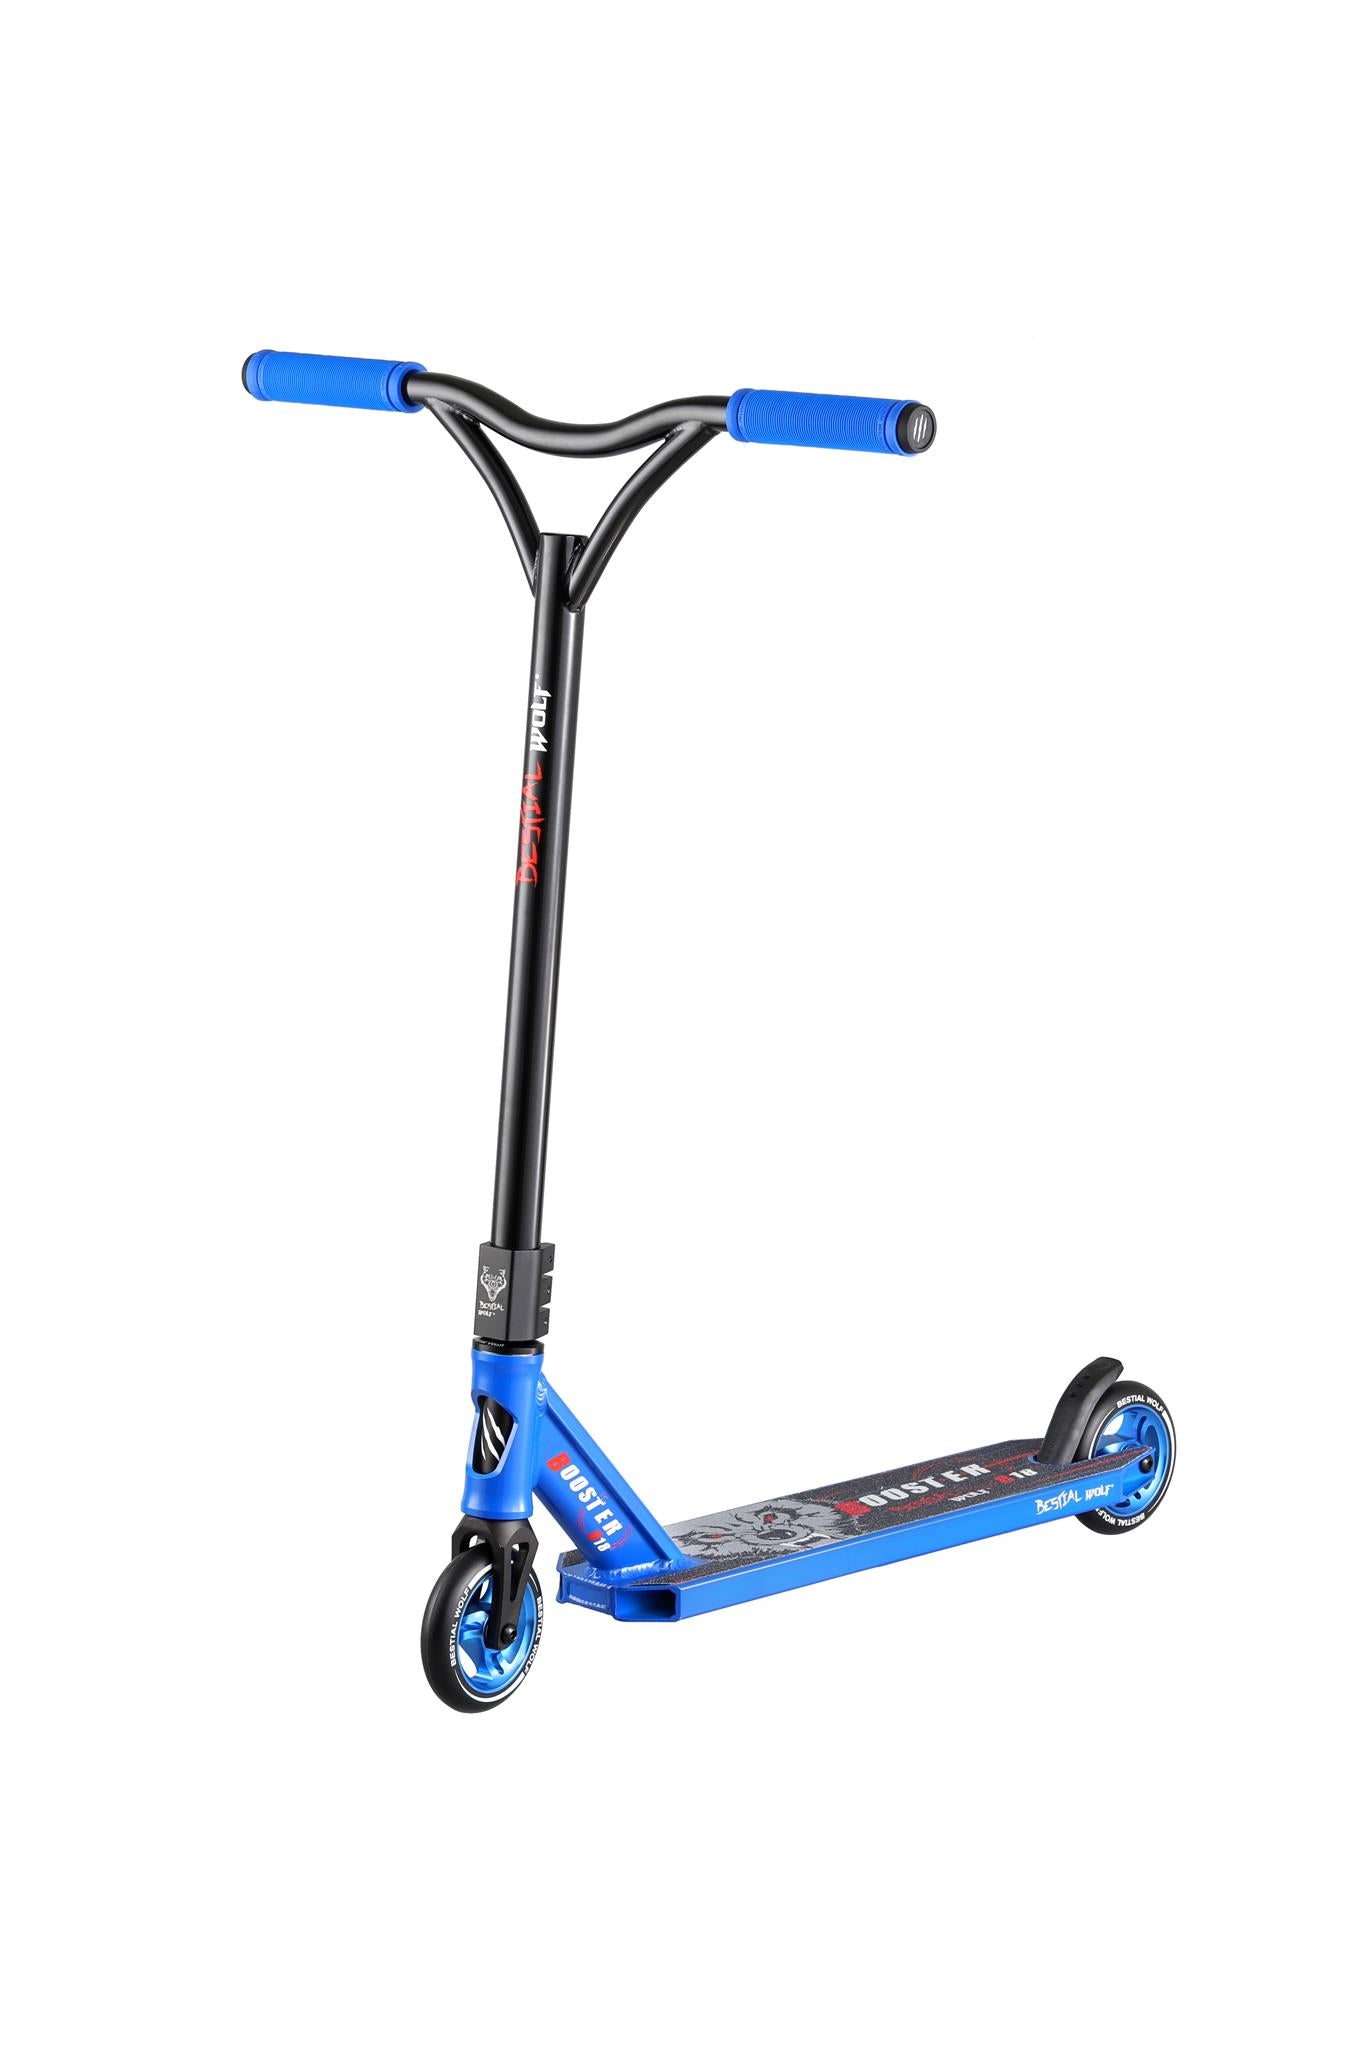 SCOOTER BOOSTER B18 AZUL Y NEGRO